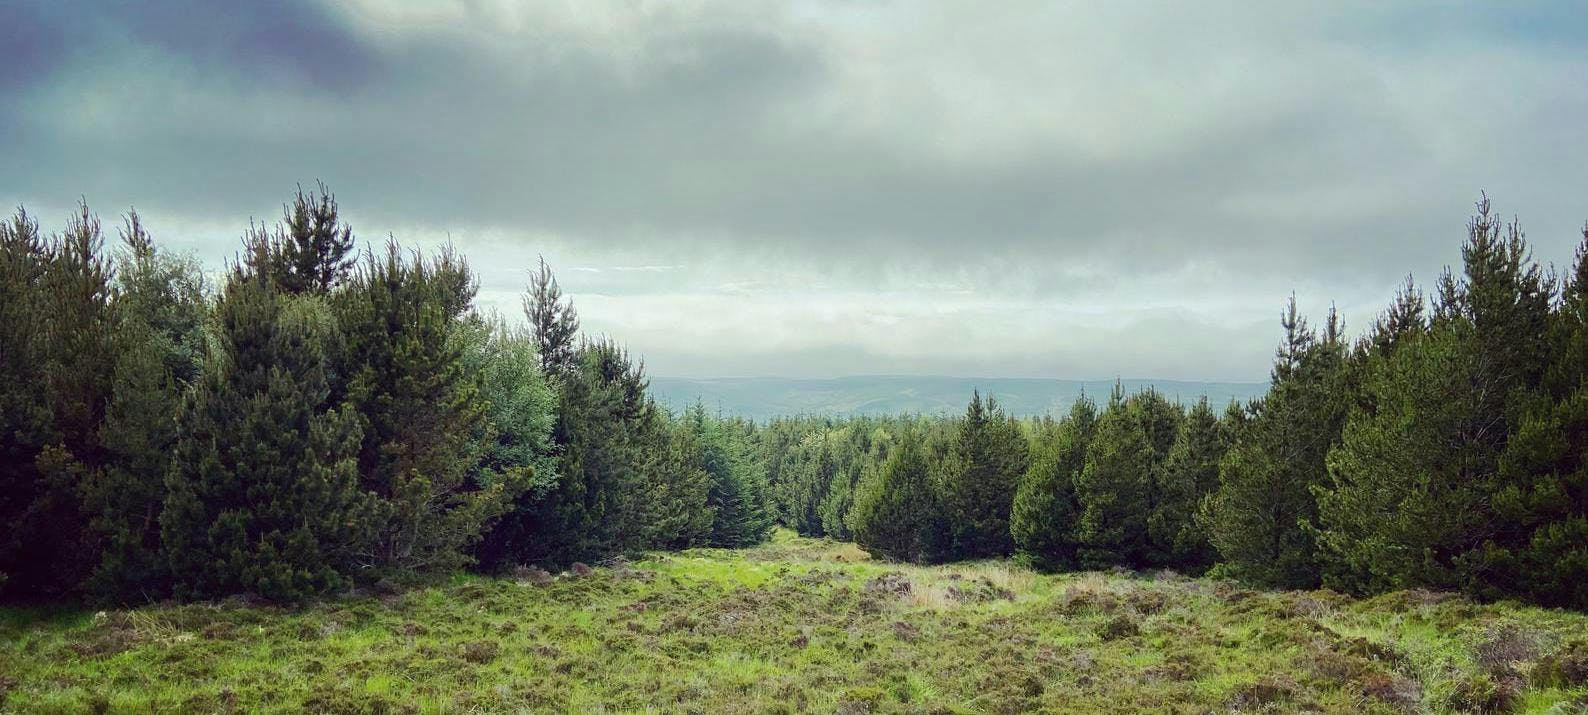 Ackron Mixed forest in Scotland